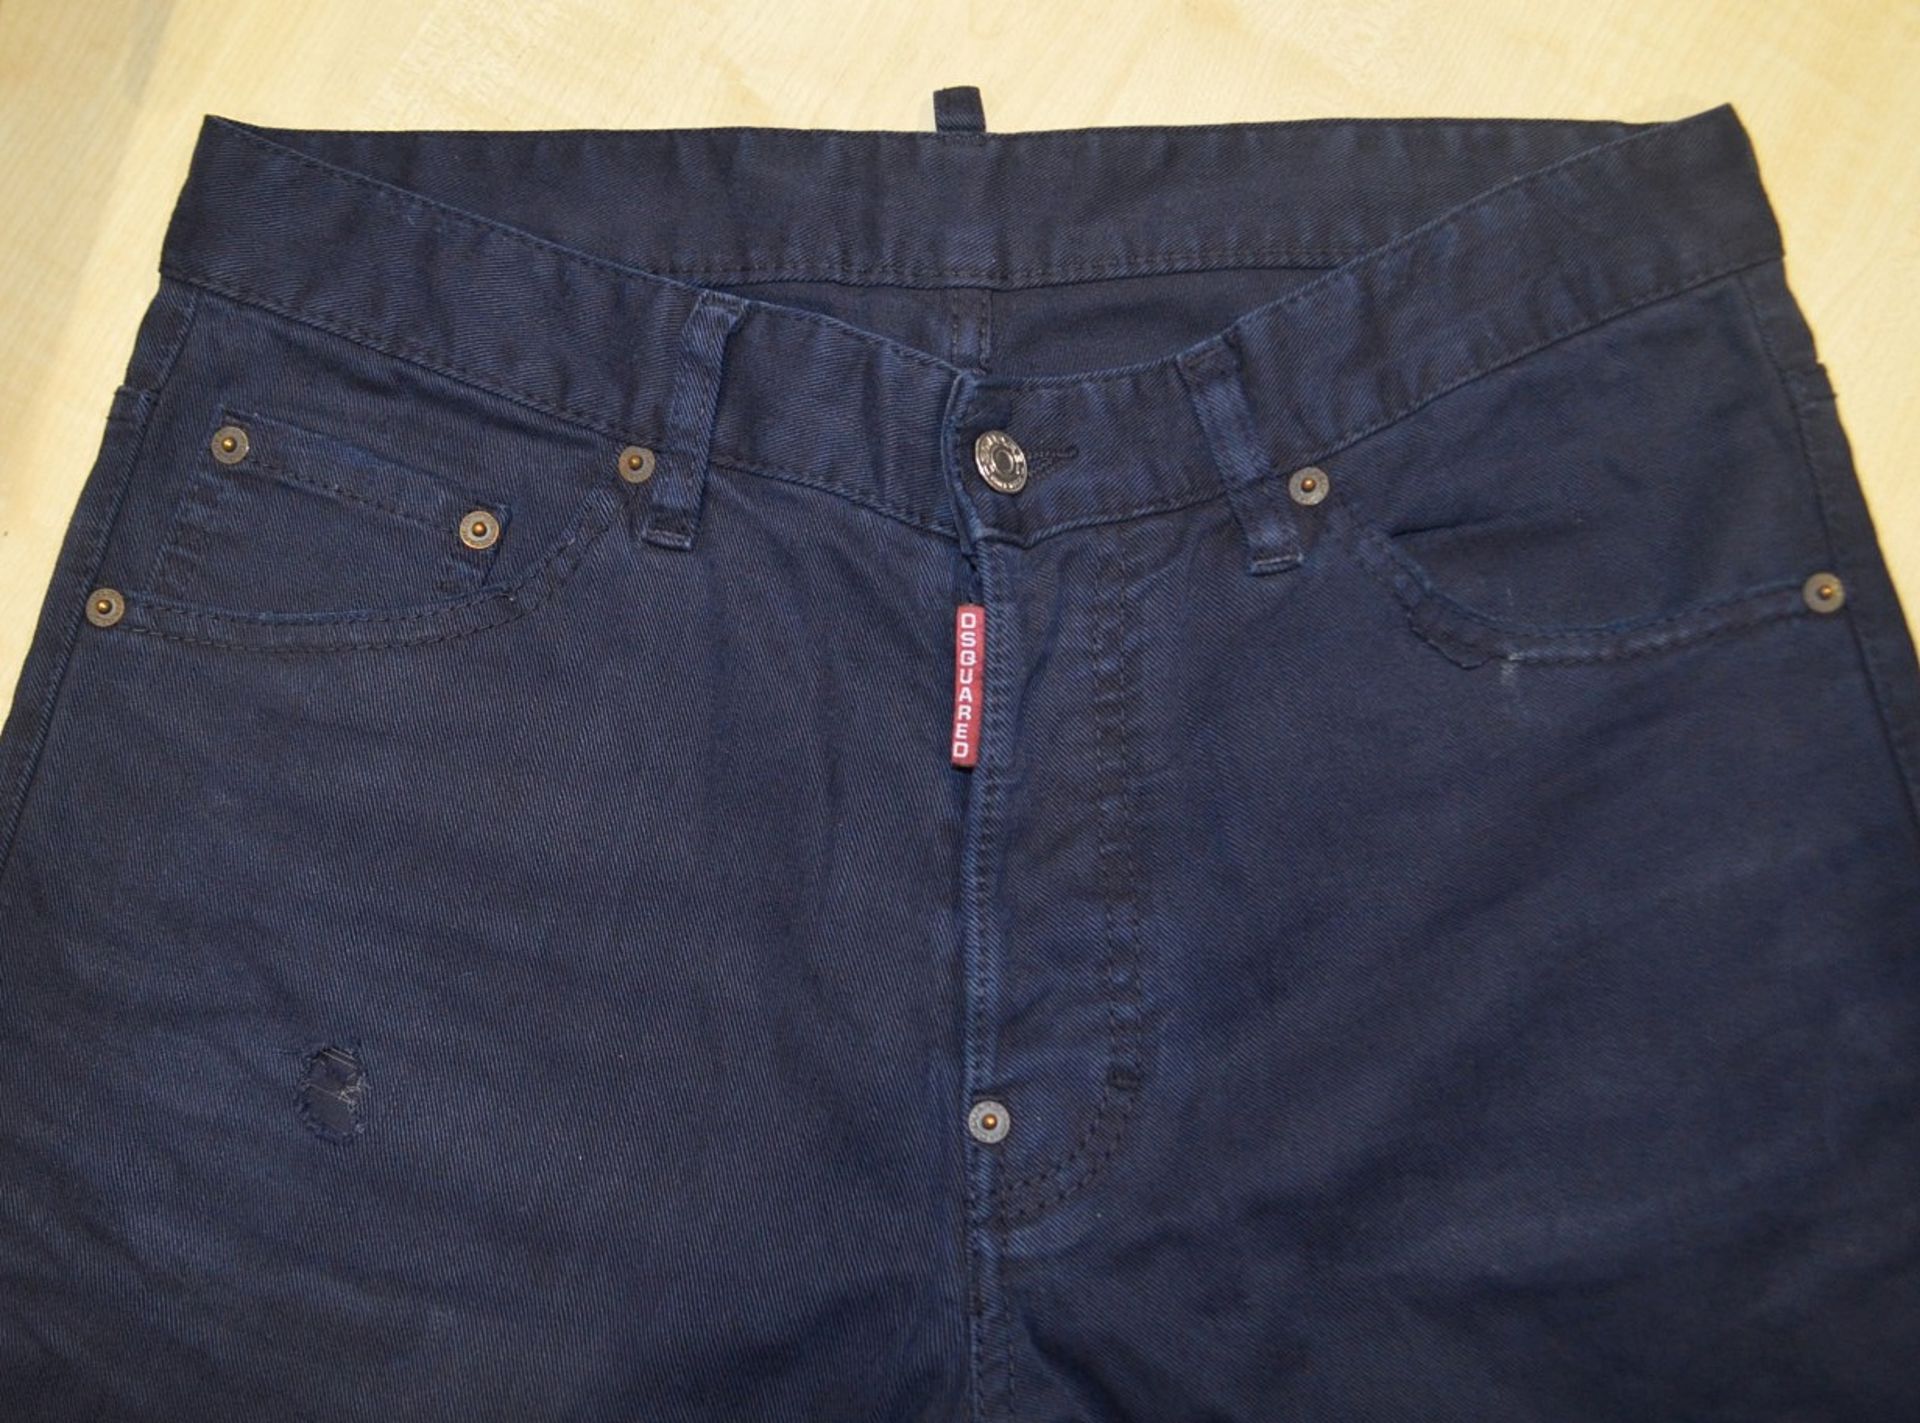 1 x Pair Of Men's Genuine Dsquared2 Designer Jeans In Navy - Waist Size: UK 30 / ITALY 46 - Preowned - Image 4 of 6